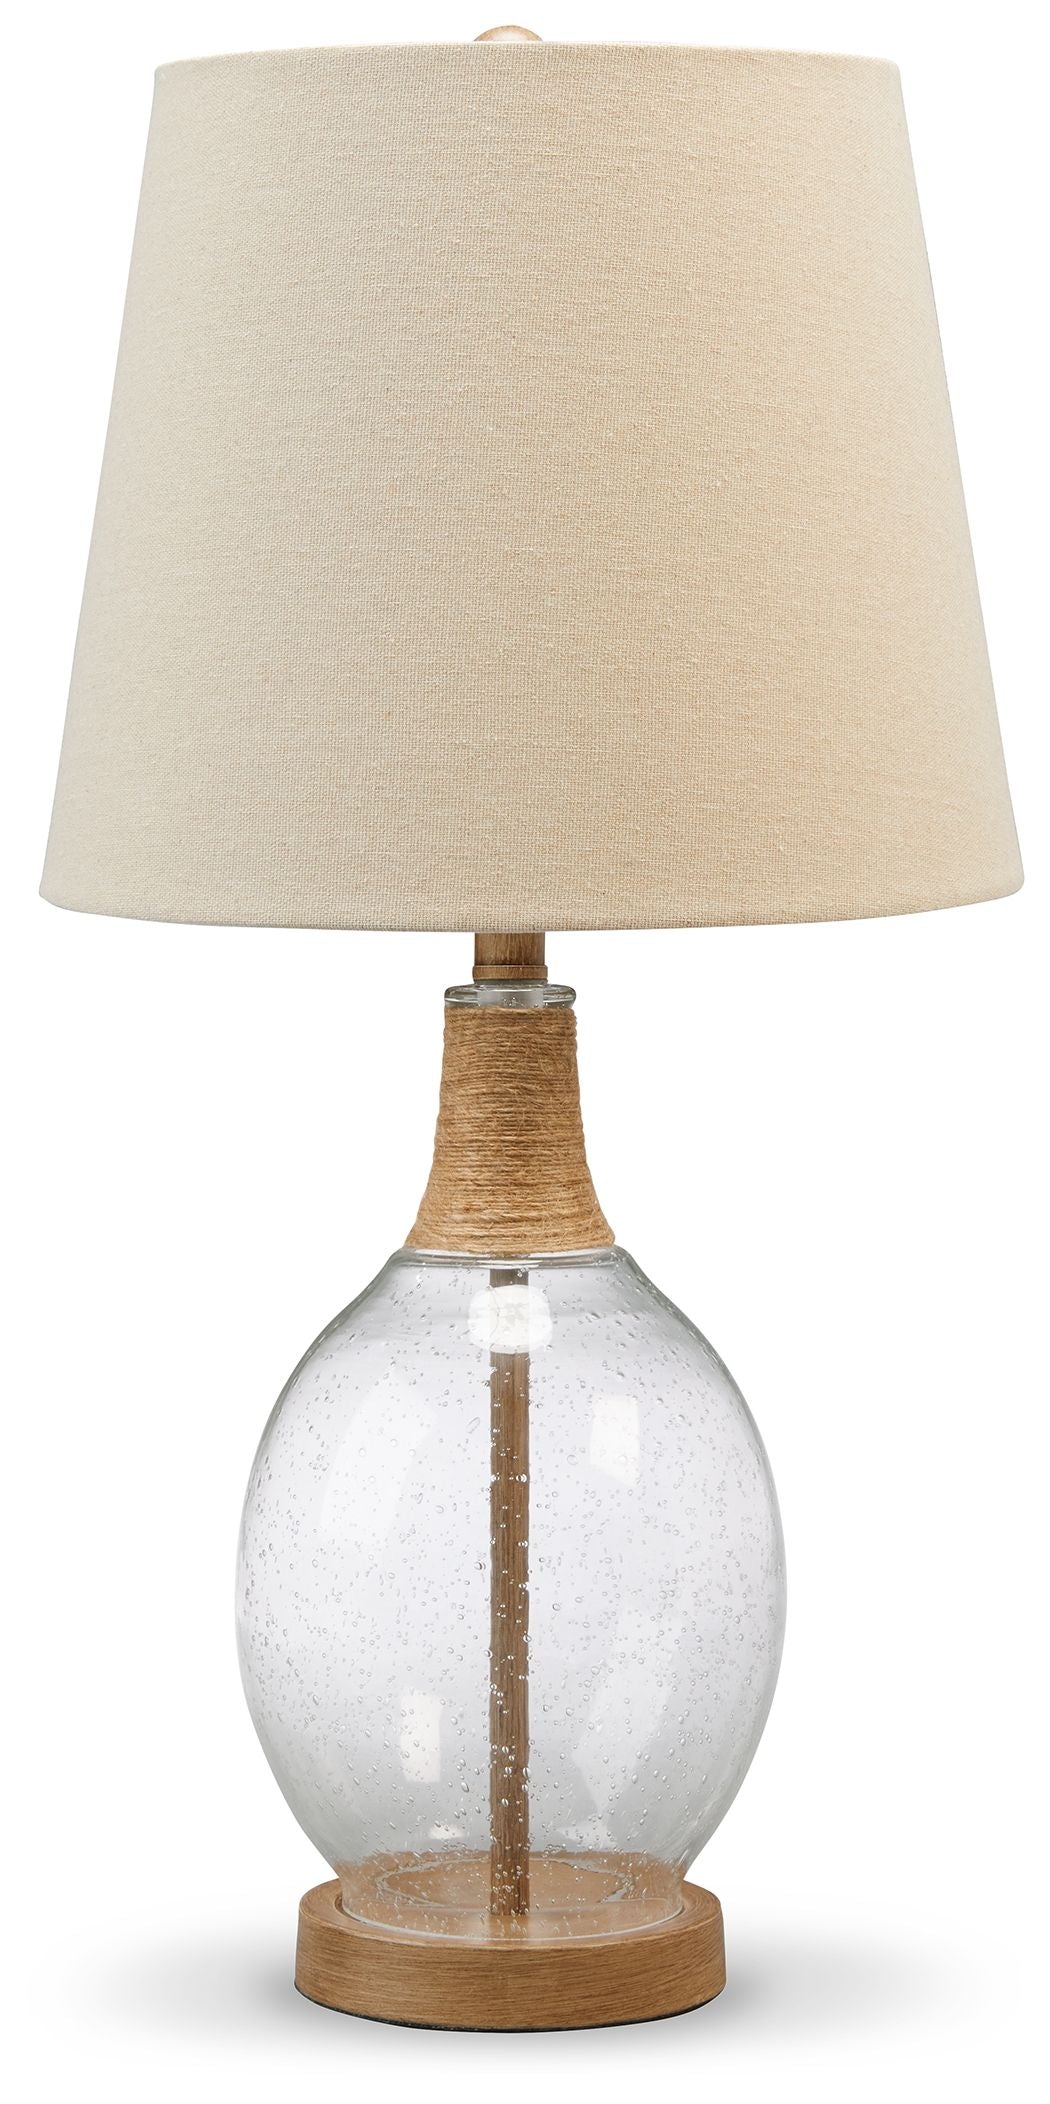 Clayleigh - Clear / Brown - Glass Table Lamp (Set of 2)